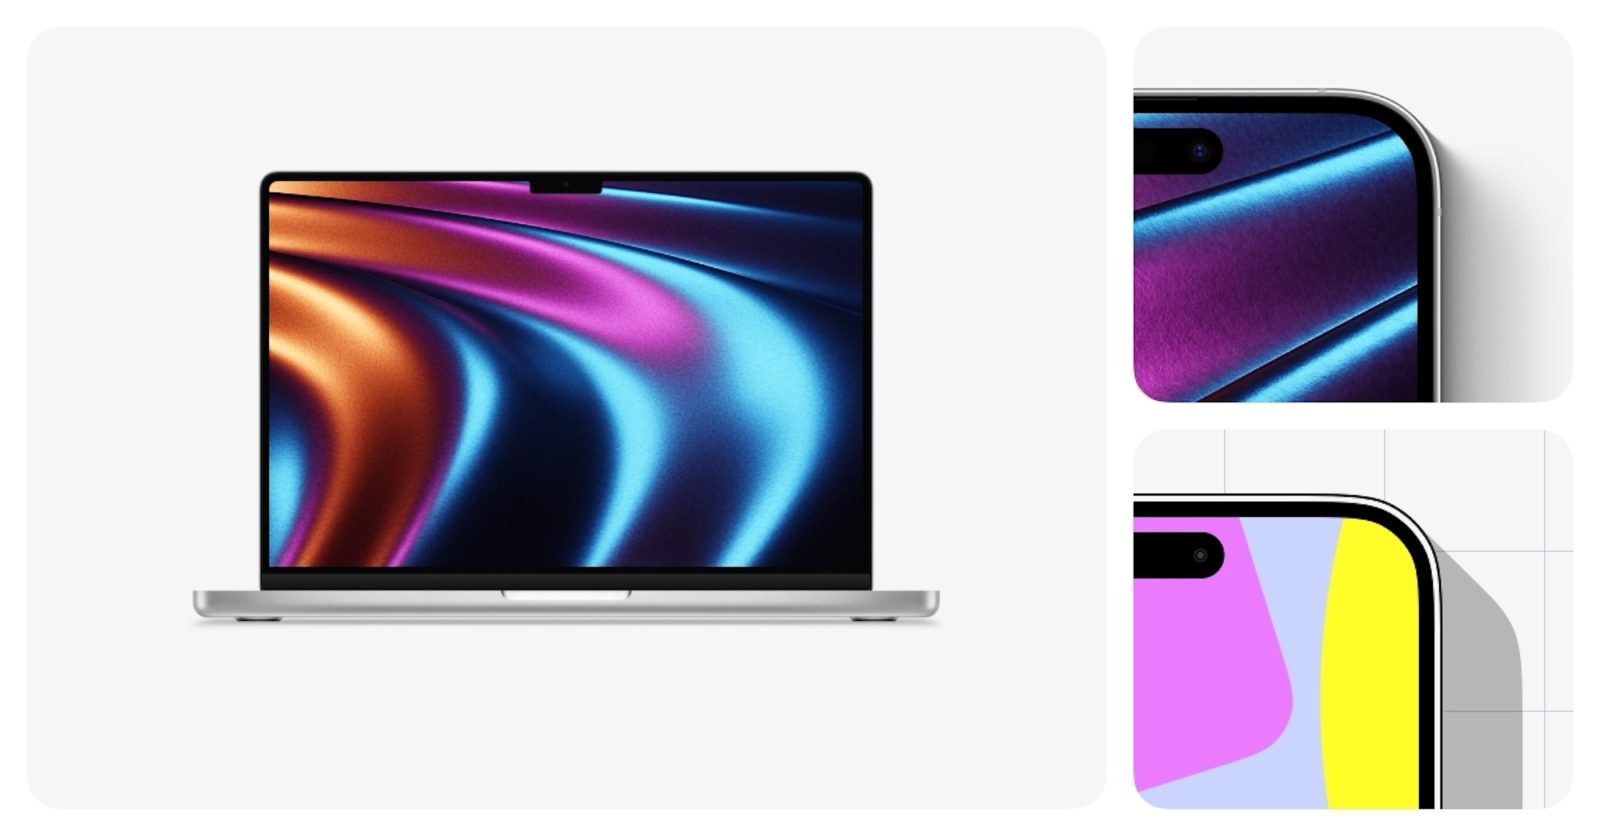 Pixelmator Pro adds new set of ‘premium device mockups’ for the latest Apple devices